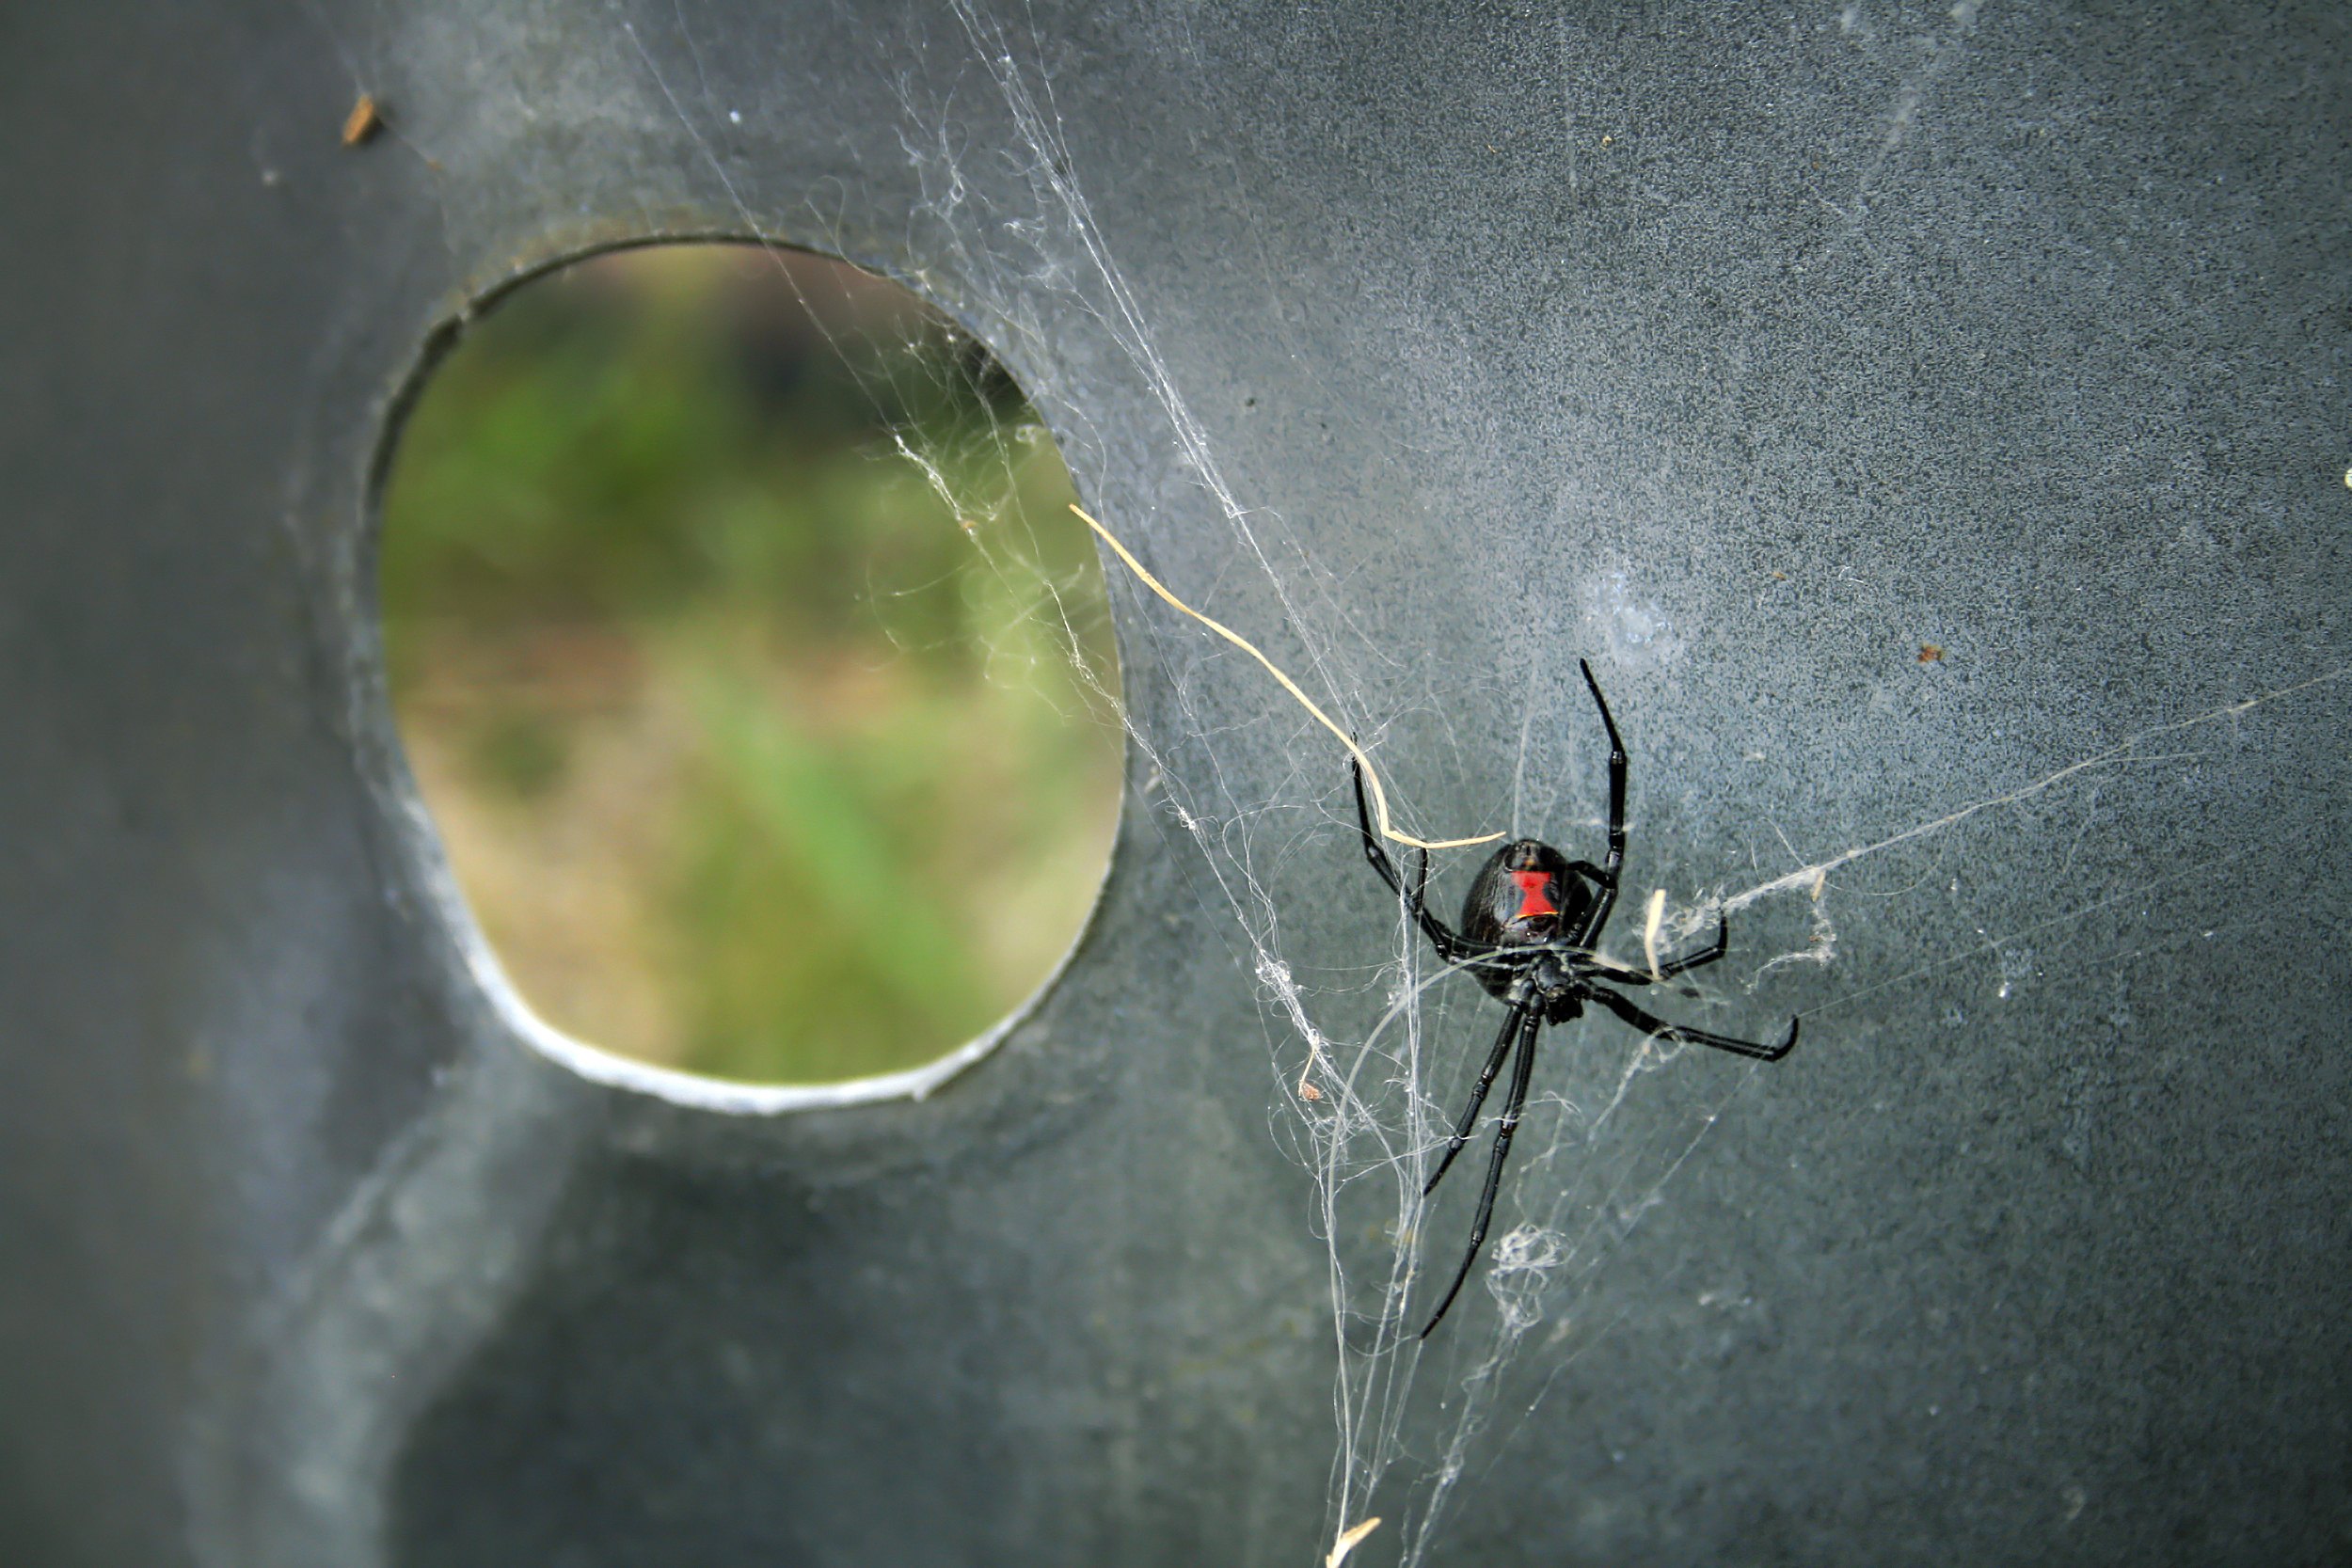 Are Black Widow Spiders Poisonous Are Male Black Widows Poisonous